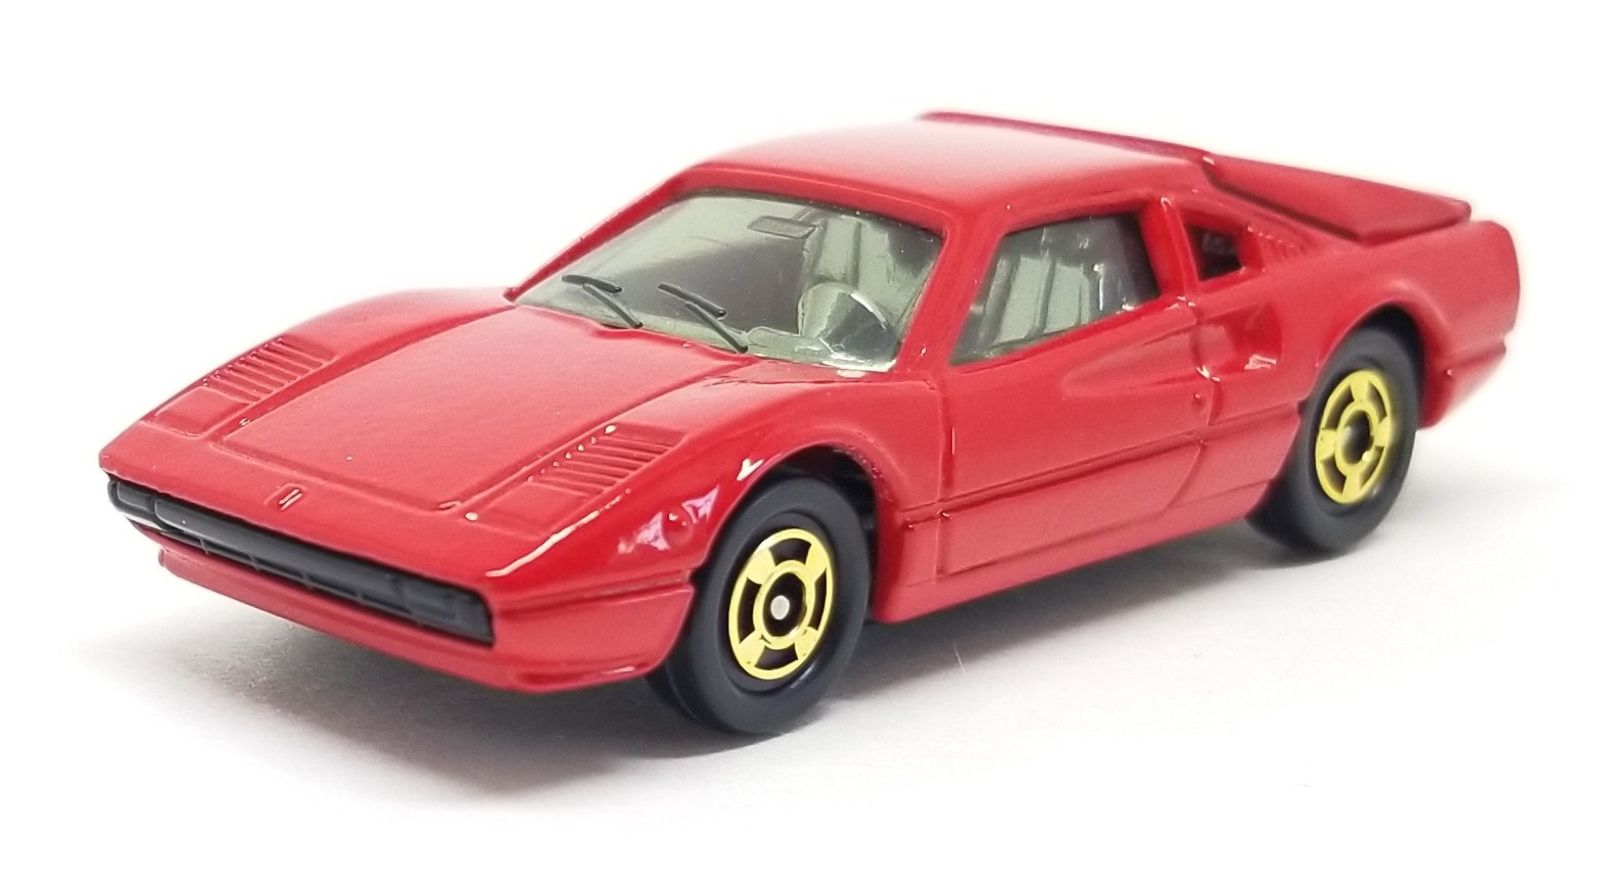 Illustration for article titled [REVIEW] Tomica Ferrari 308 GTB